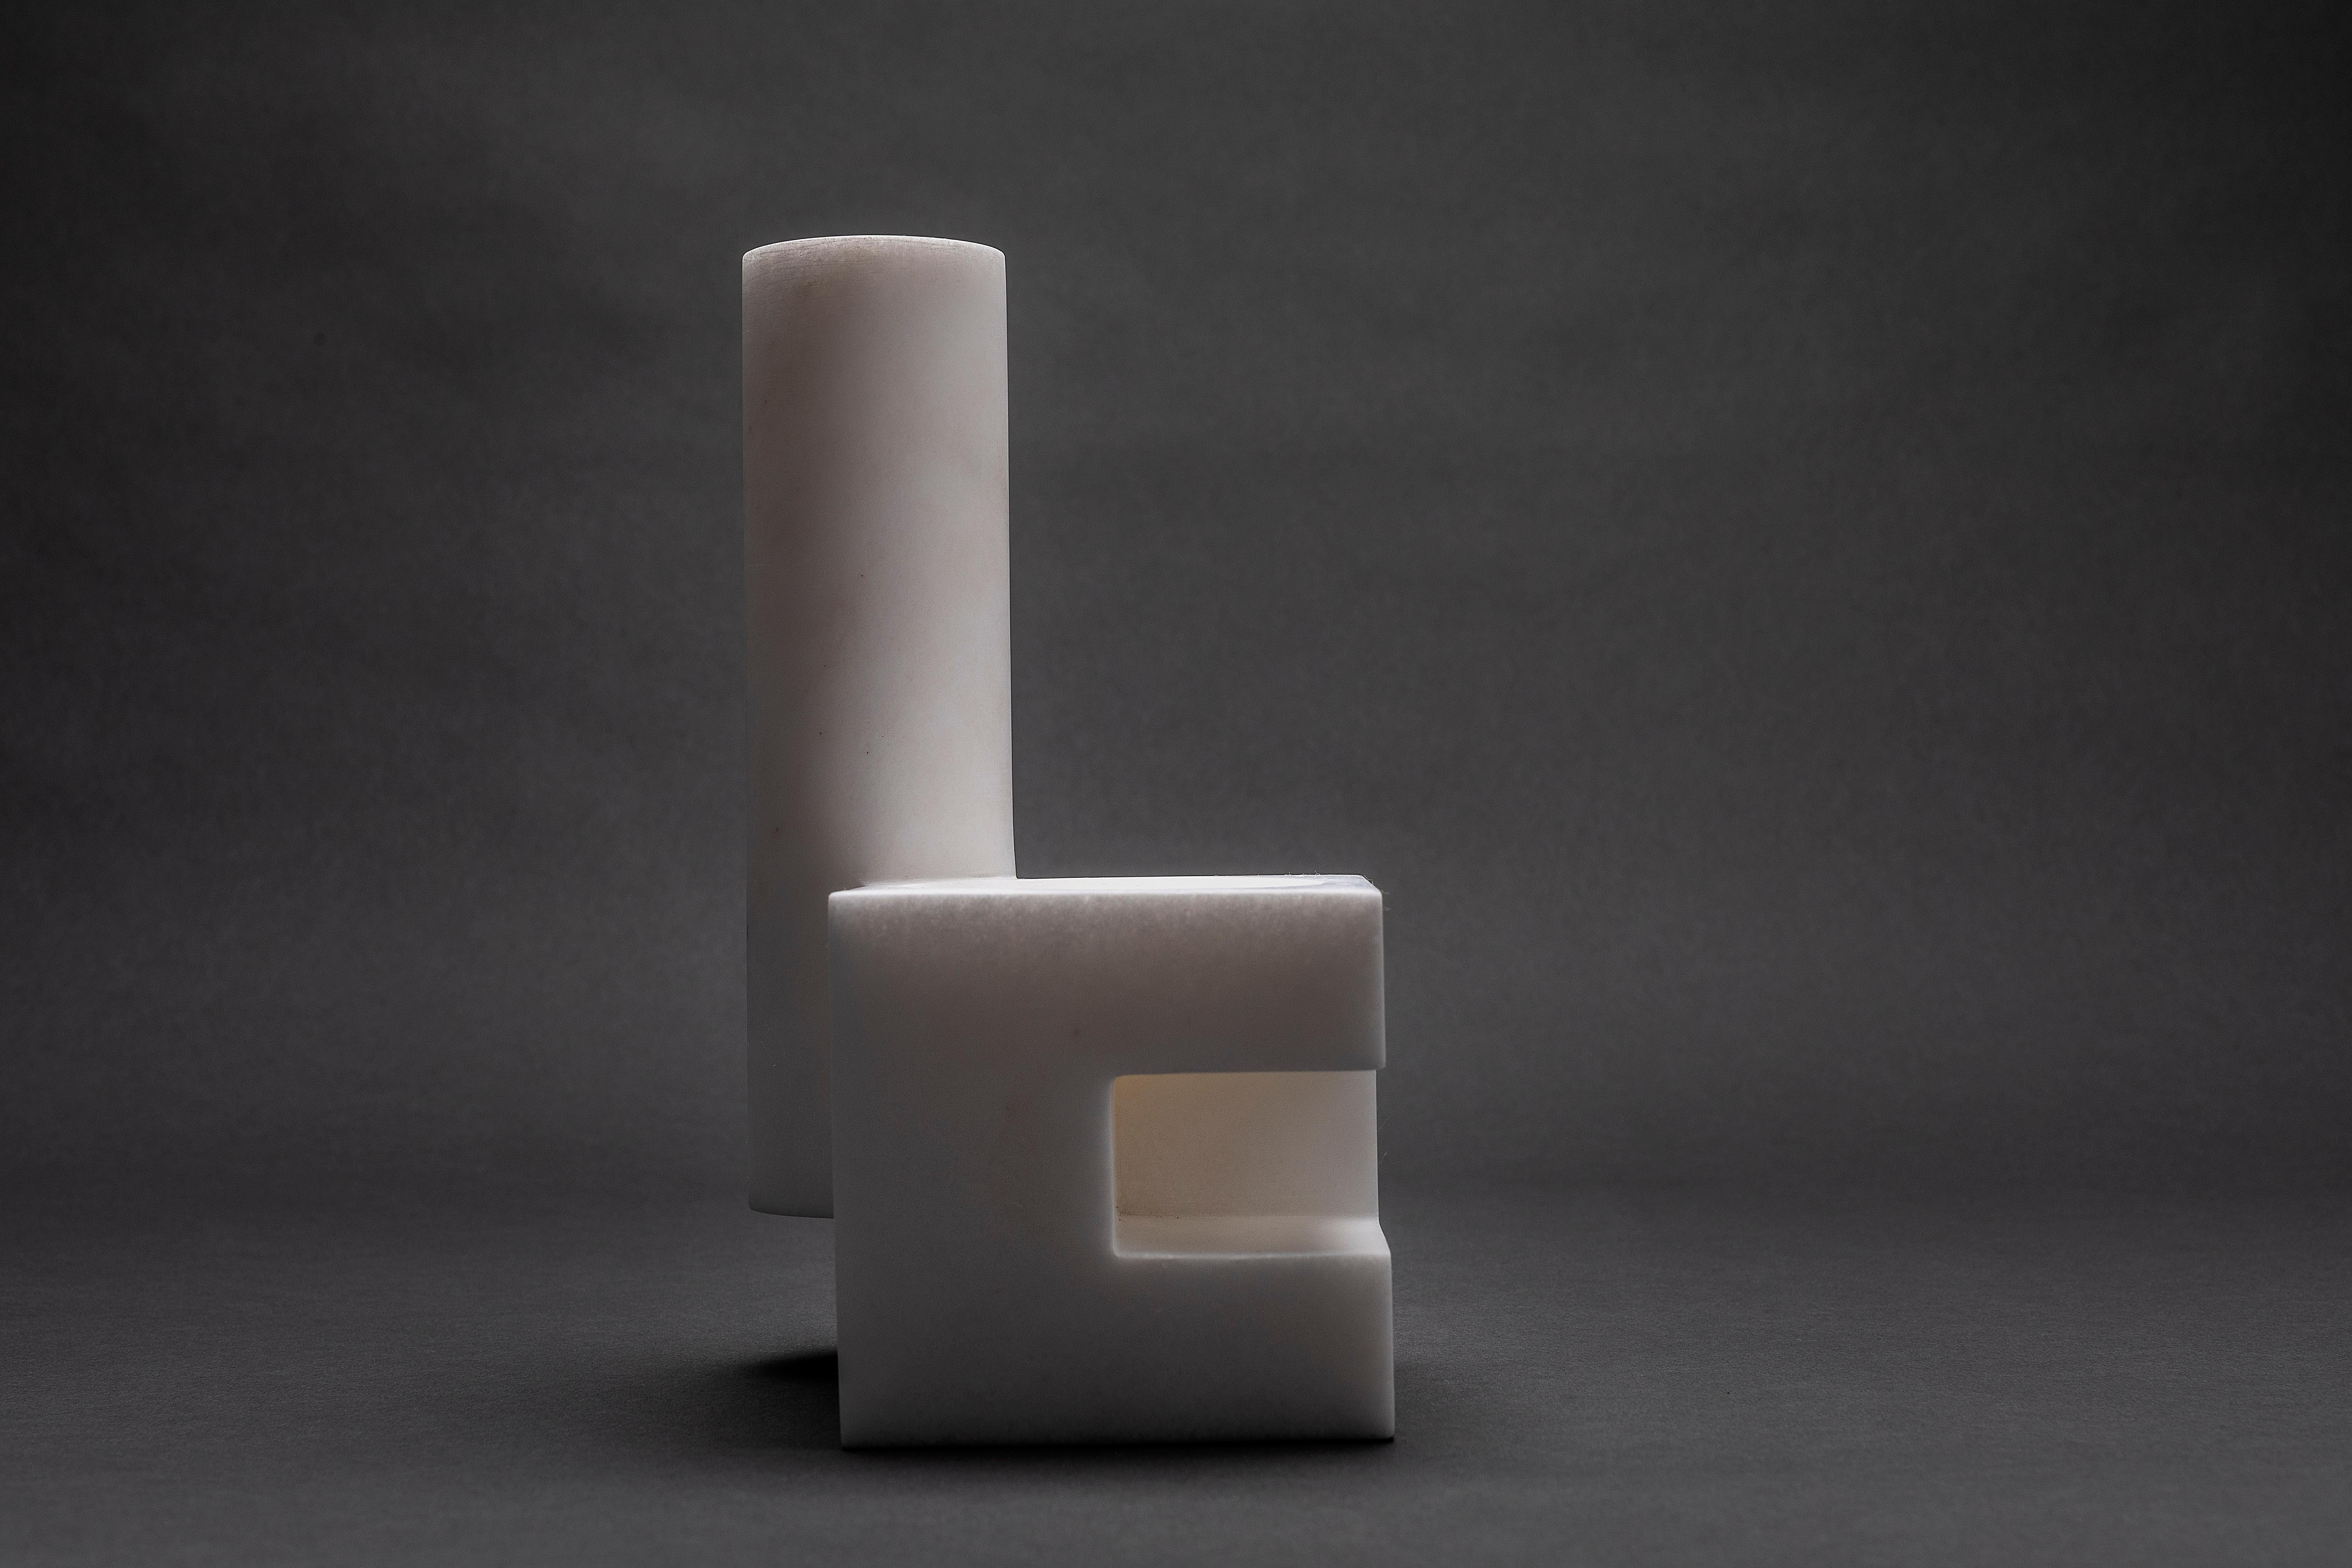 Florero Tubo Galeana vase by Jorge Diego Etienne
Limited Edition of 10 + 1 AP
Dimensions: D 11.5 x W 11.5 x H 21 cm
Material: alabaster

Galeana is a collection of 6 objects designed by Jorge Diego Etienne and sculpted in alabaster by the